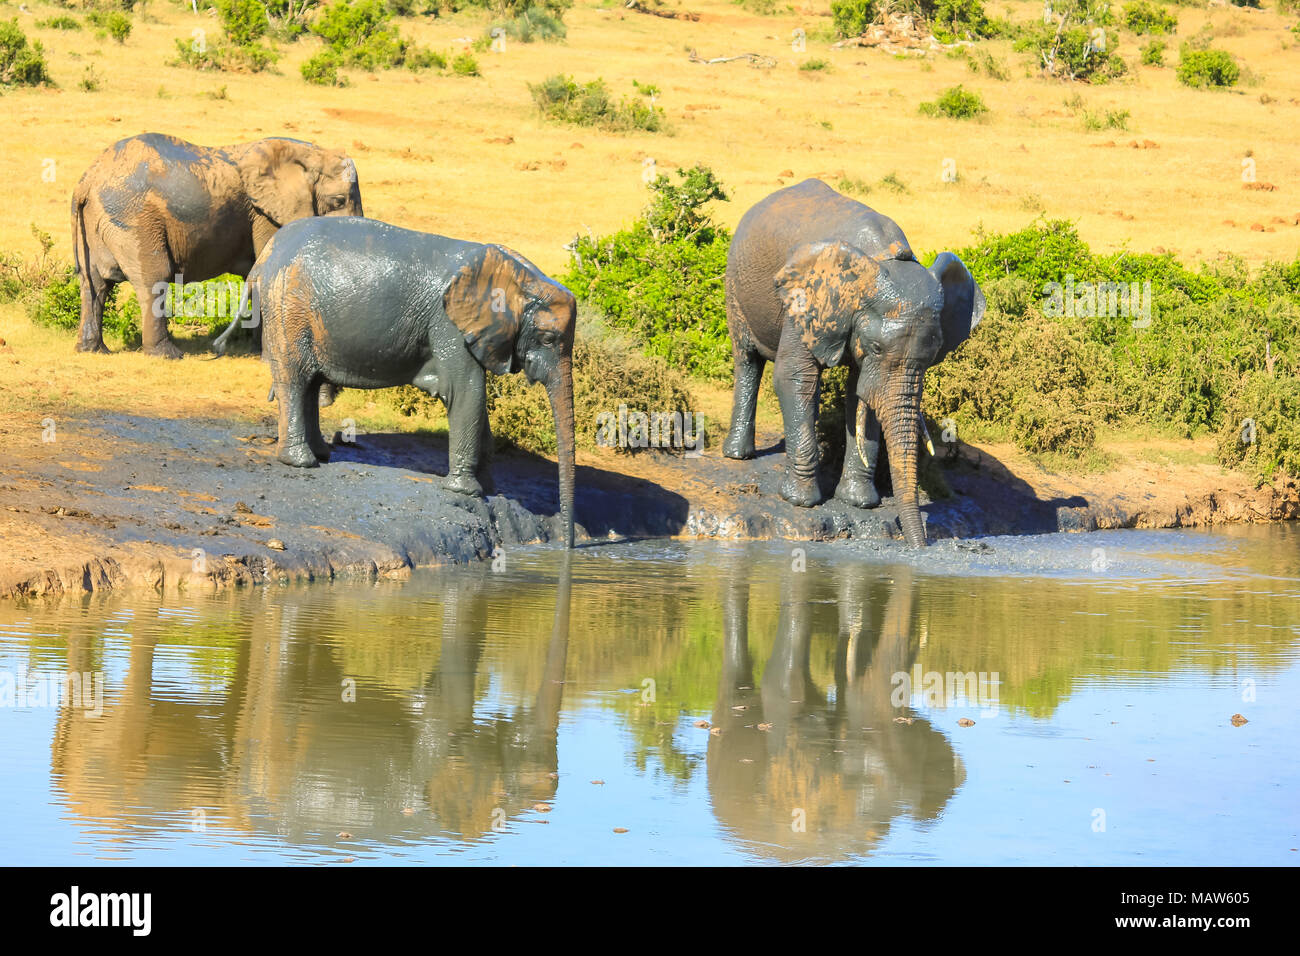 Two African Elephants covered in mud drink water from a pool in Addo Elephant National Park, Eastern Cape, South Africa. Summer season in a sunny day. Elephants are reflected in the waterhole. Stock Photo